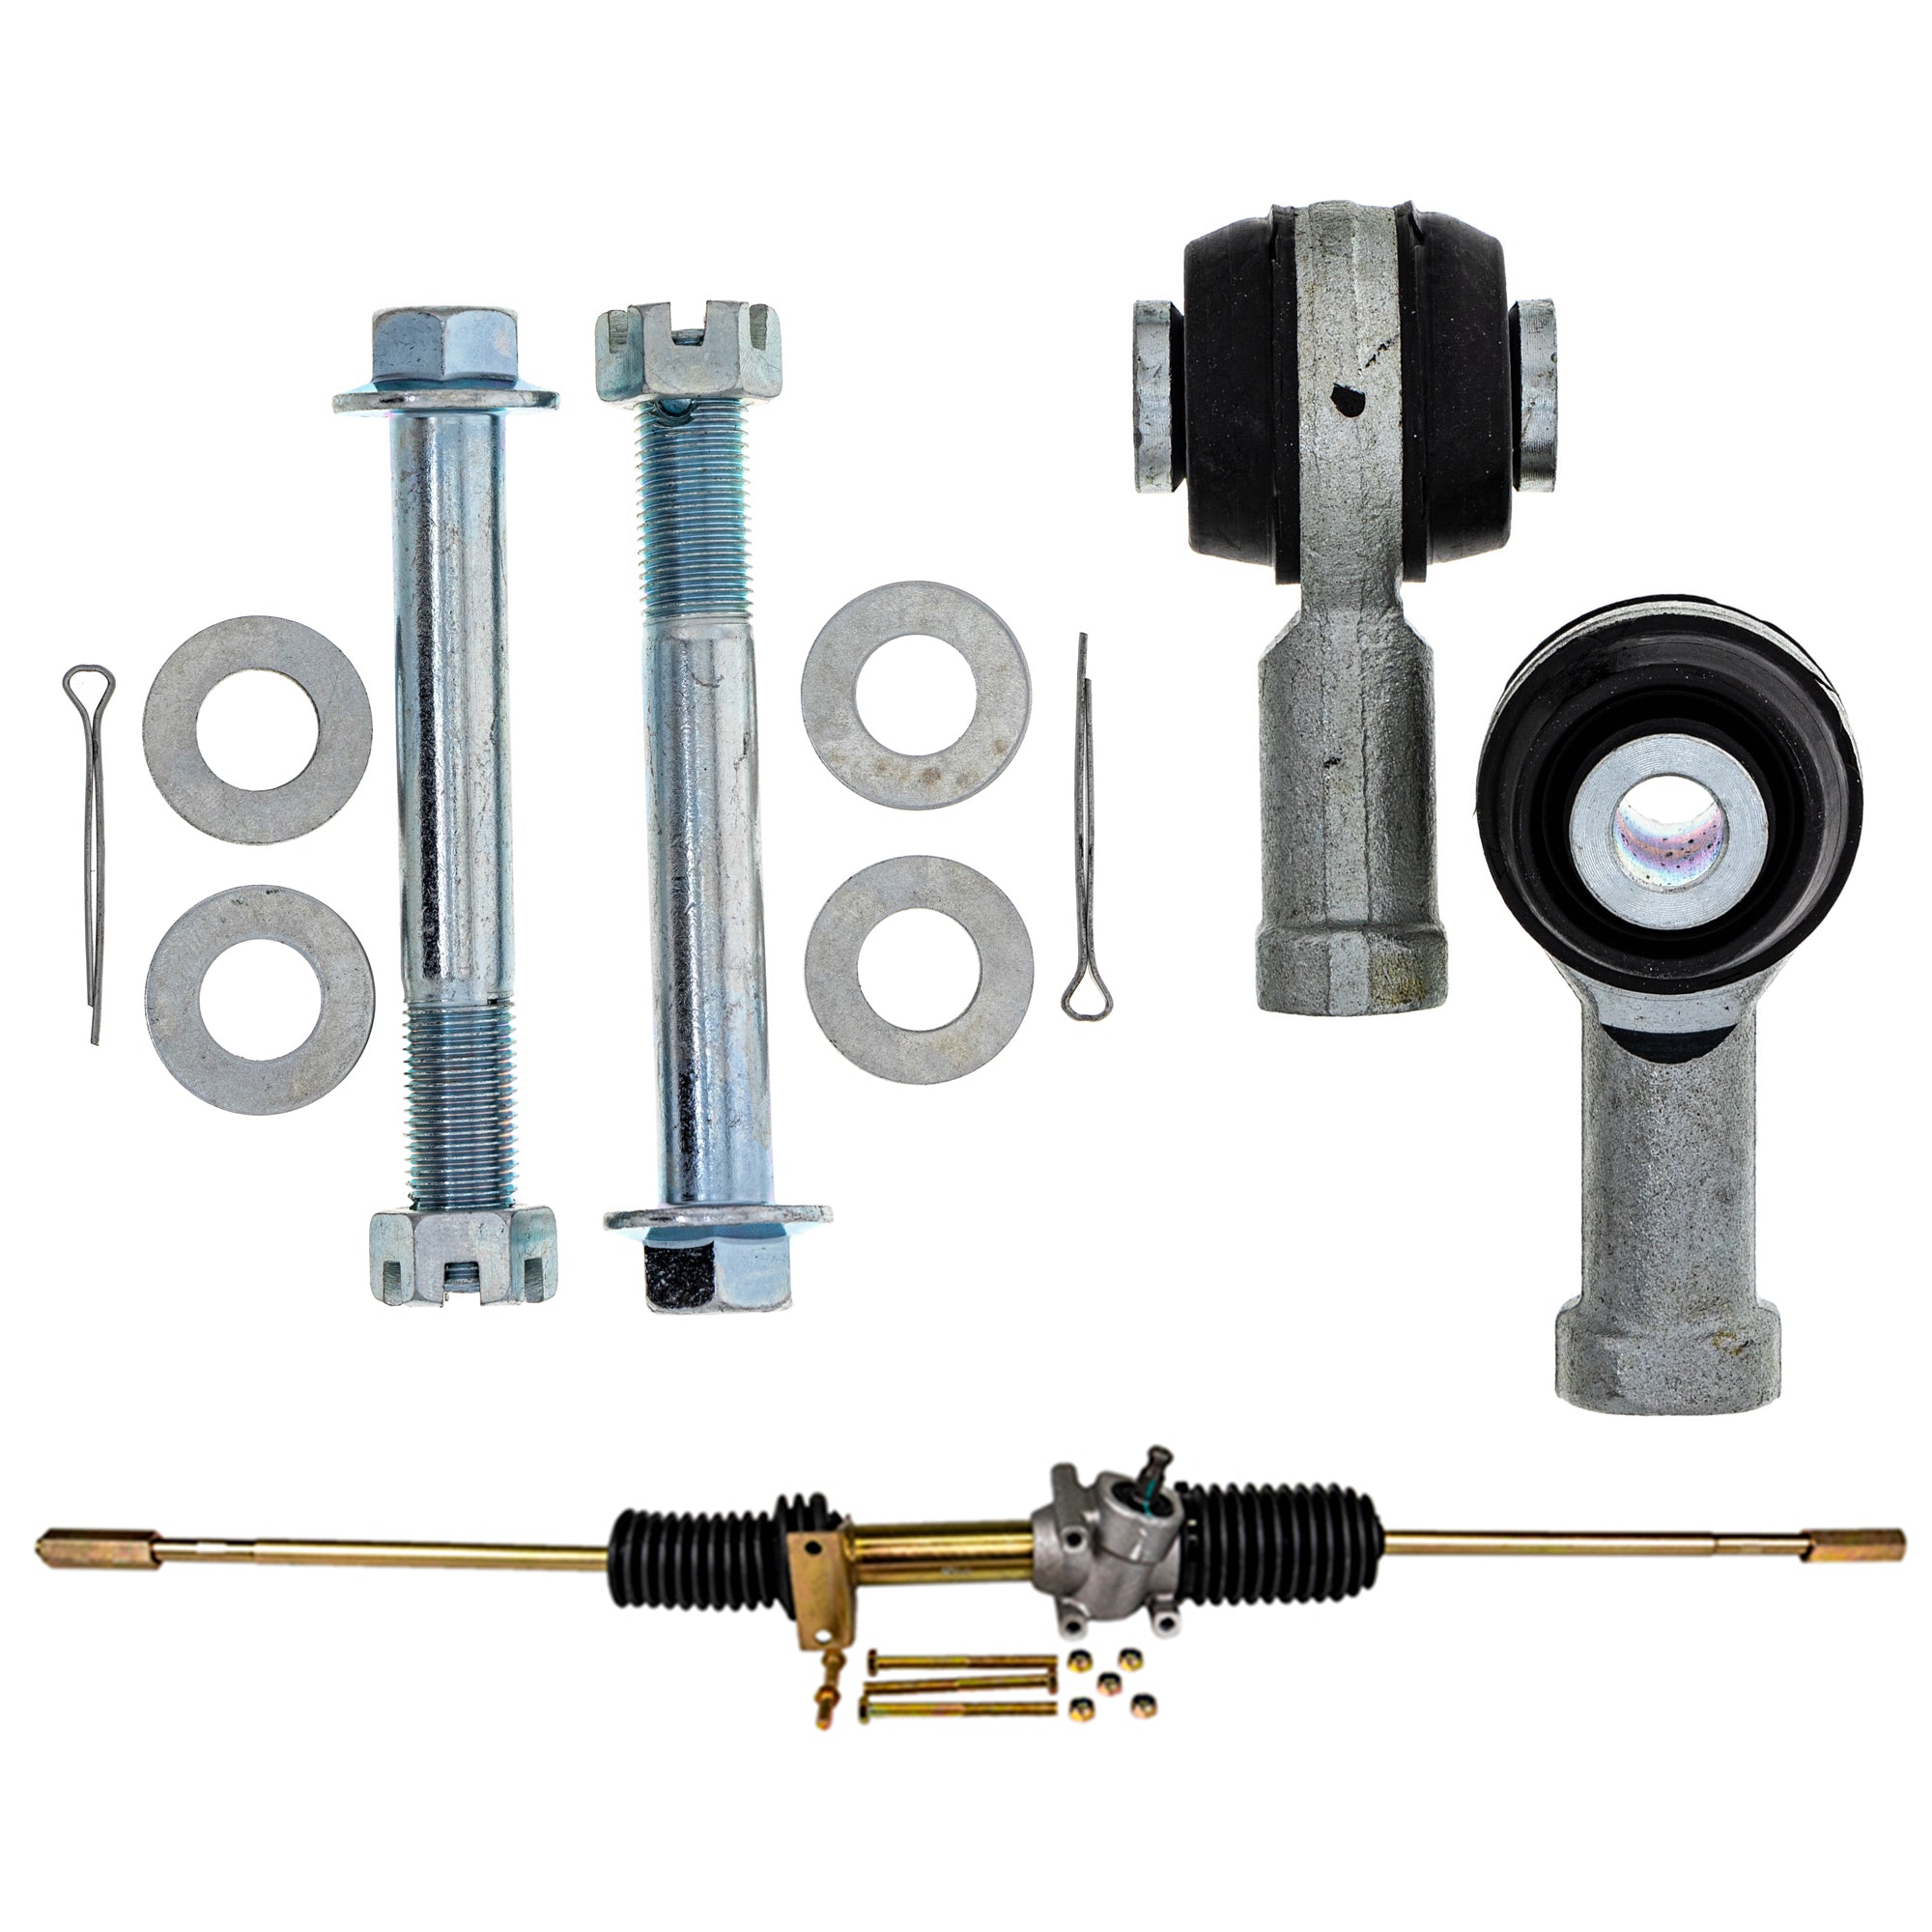 Steering Rack Assembly & Tie Rods Kit for zOTHER BRP Can-Am Ski-Doo Sea-Doo Commander NICHE MK1006183